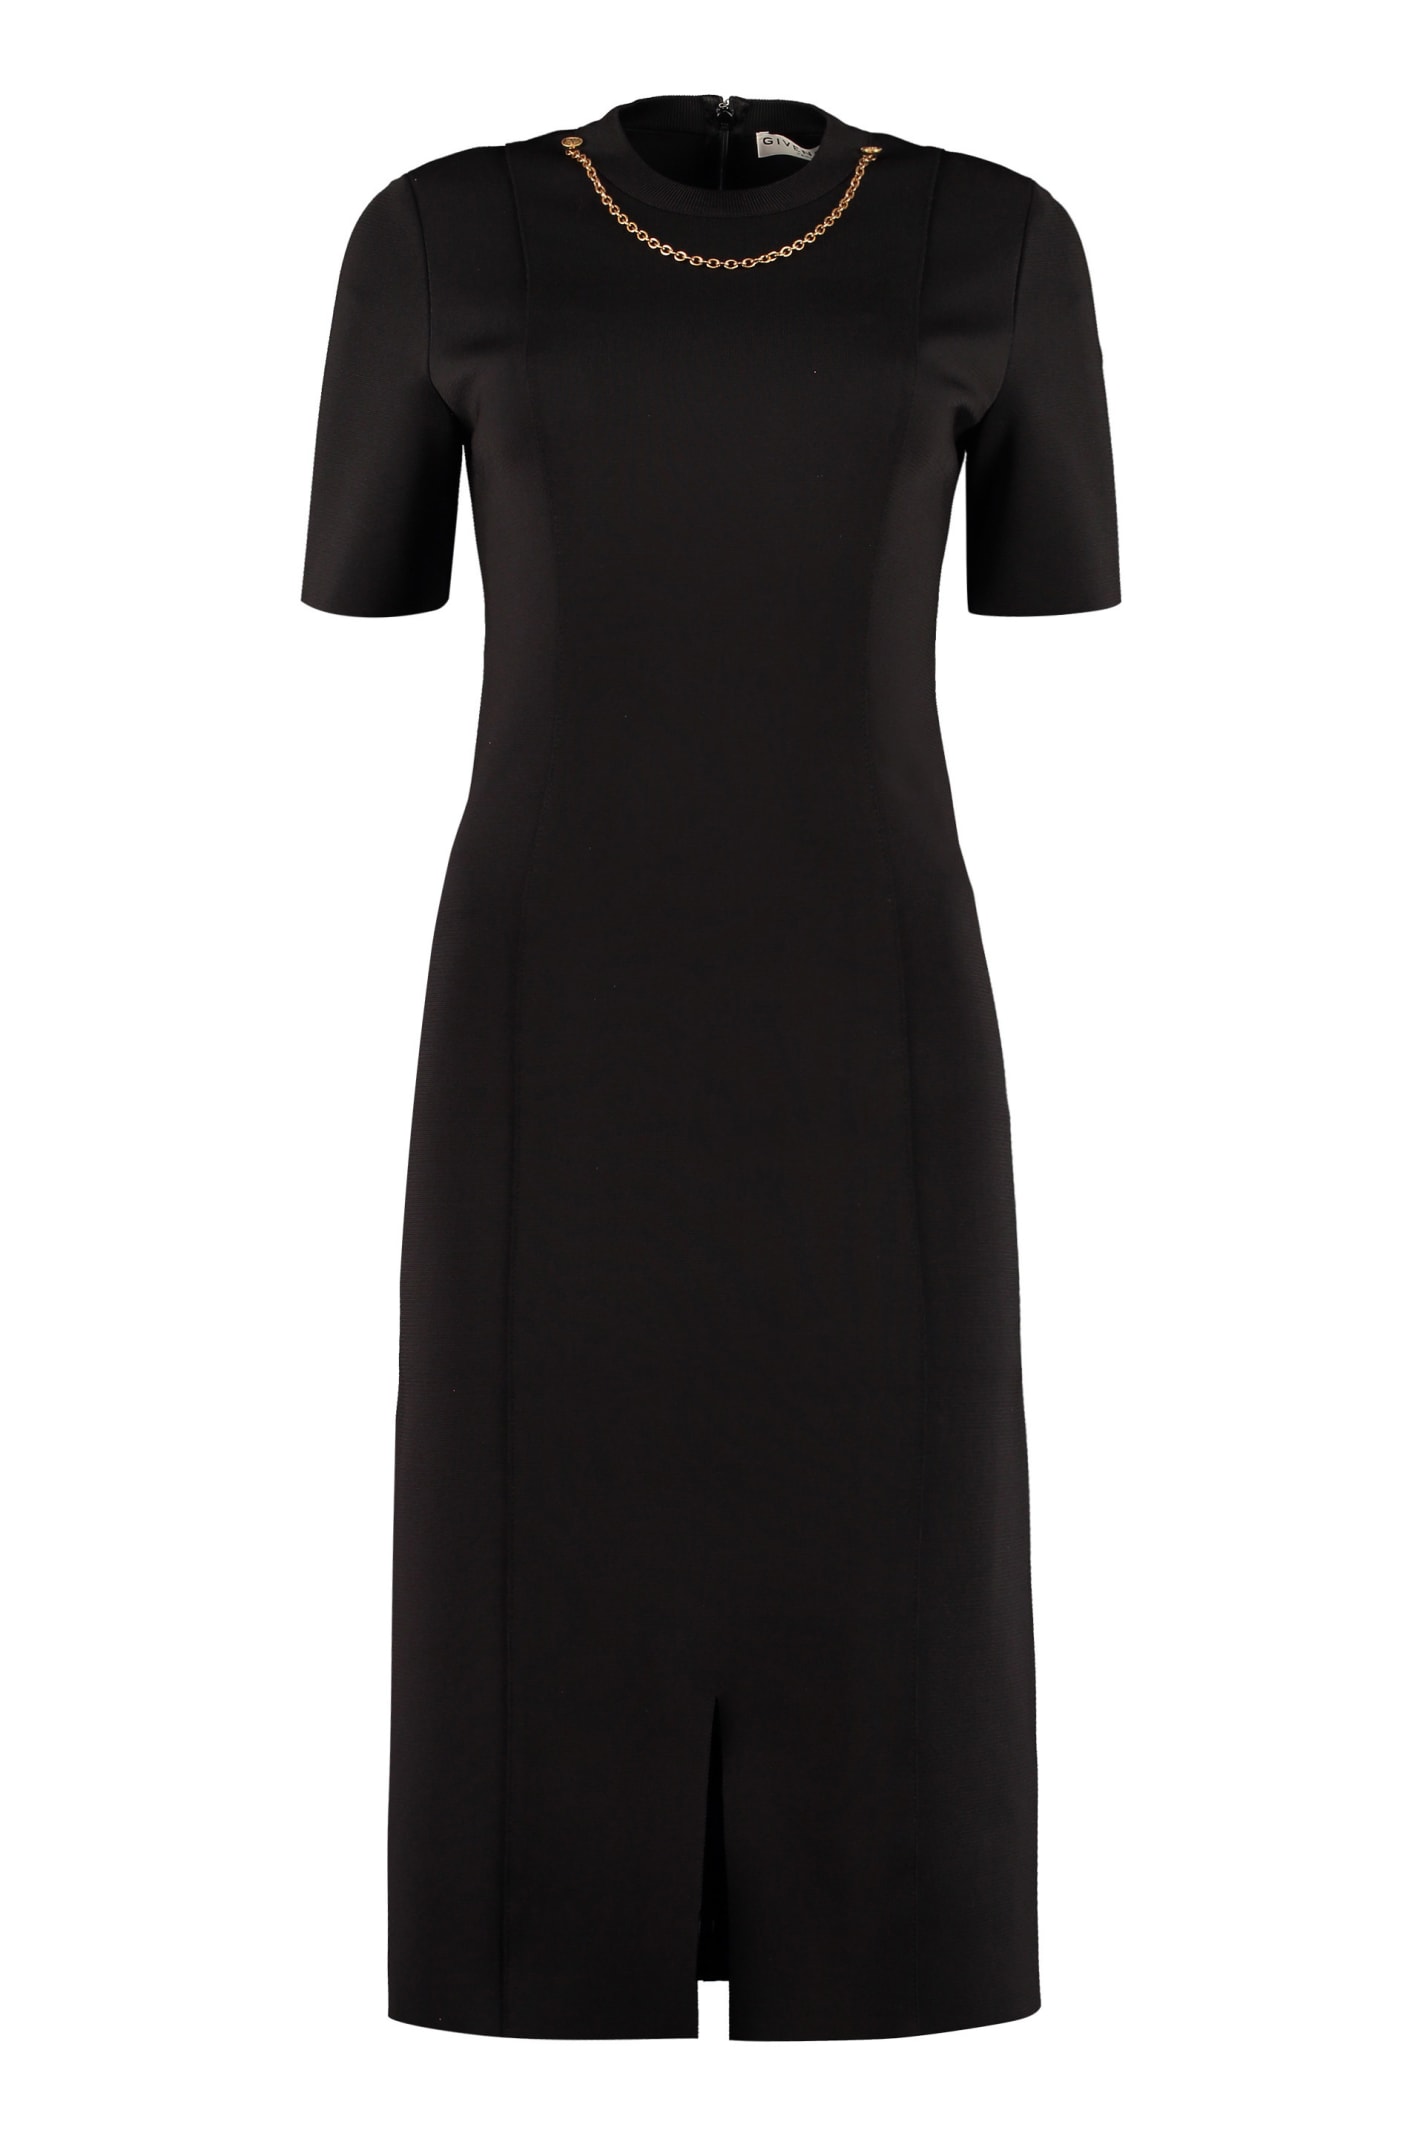 Photo of  Givenchy Knitted Sheath Dress- shop Givenchy Dresses online sales